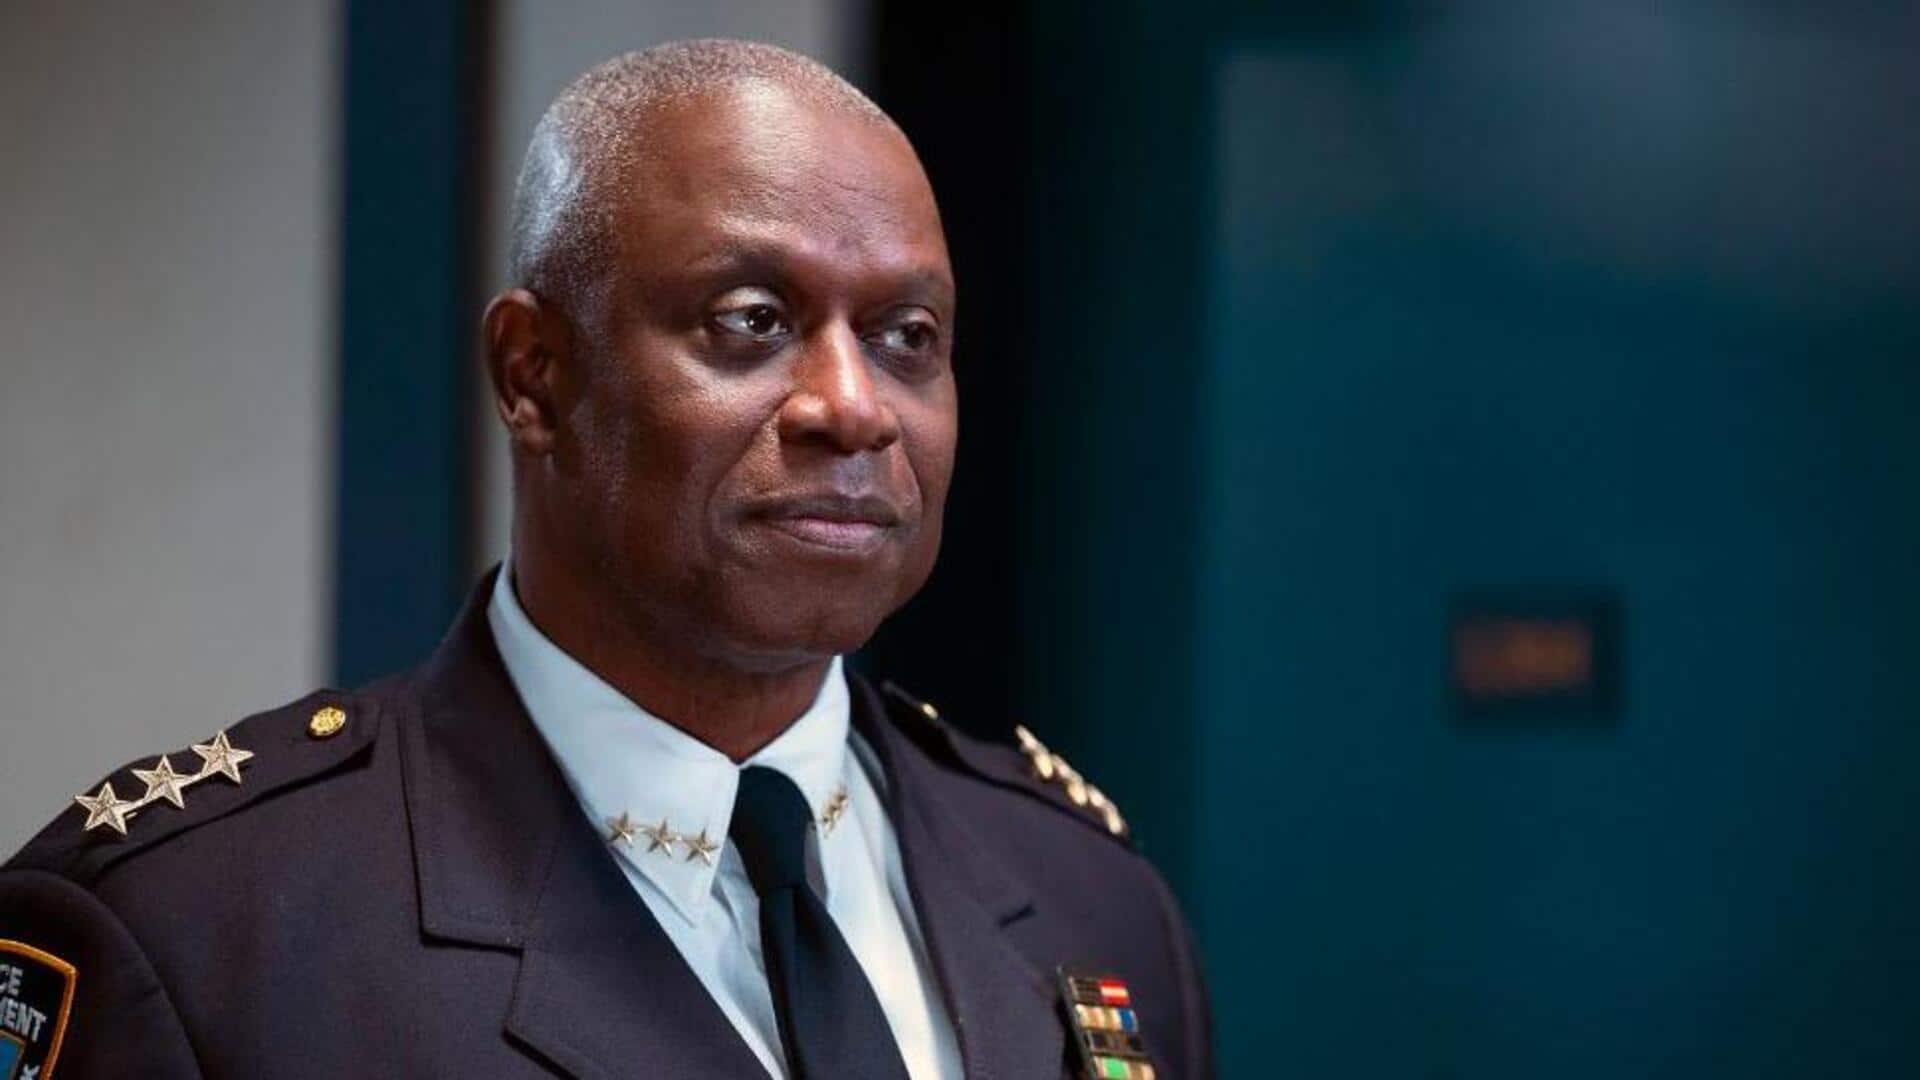 'Brooklyn Nine-Nine' actor André Braugher passes away at 61